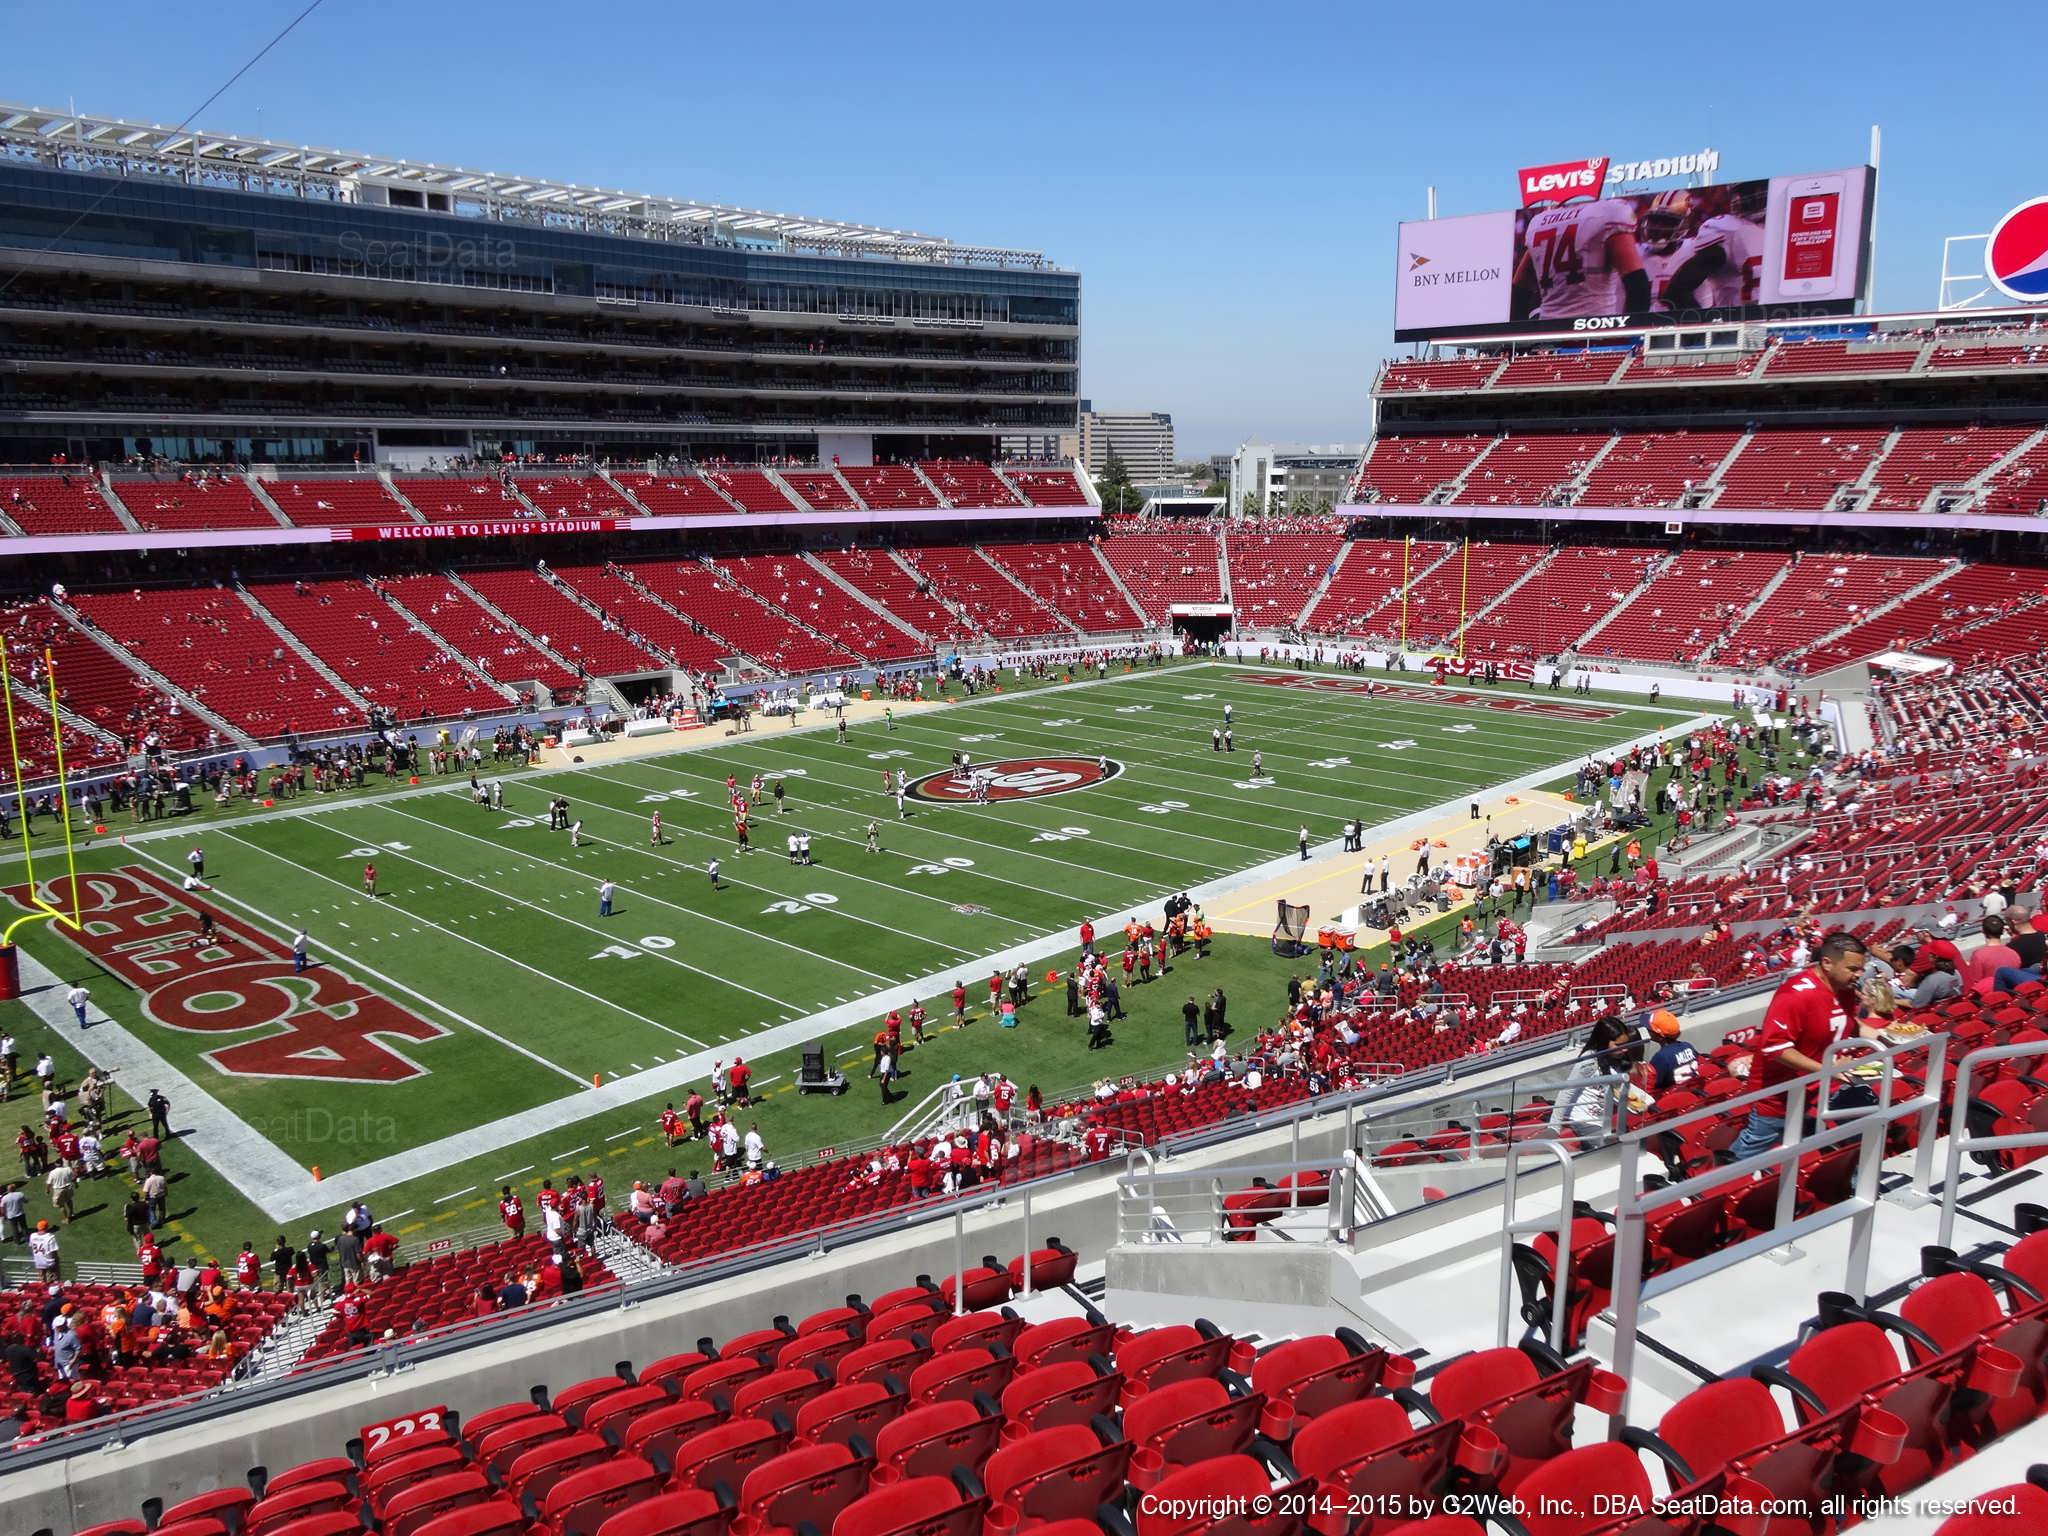 Seat view from section 223 at Levi’s Stadium, home of the San Francisco 49ers